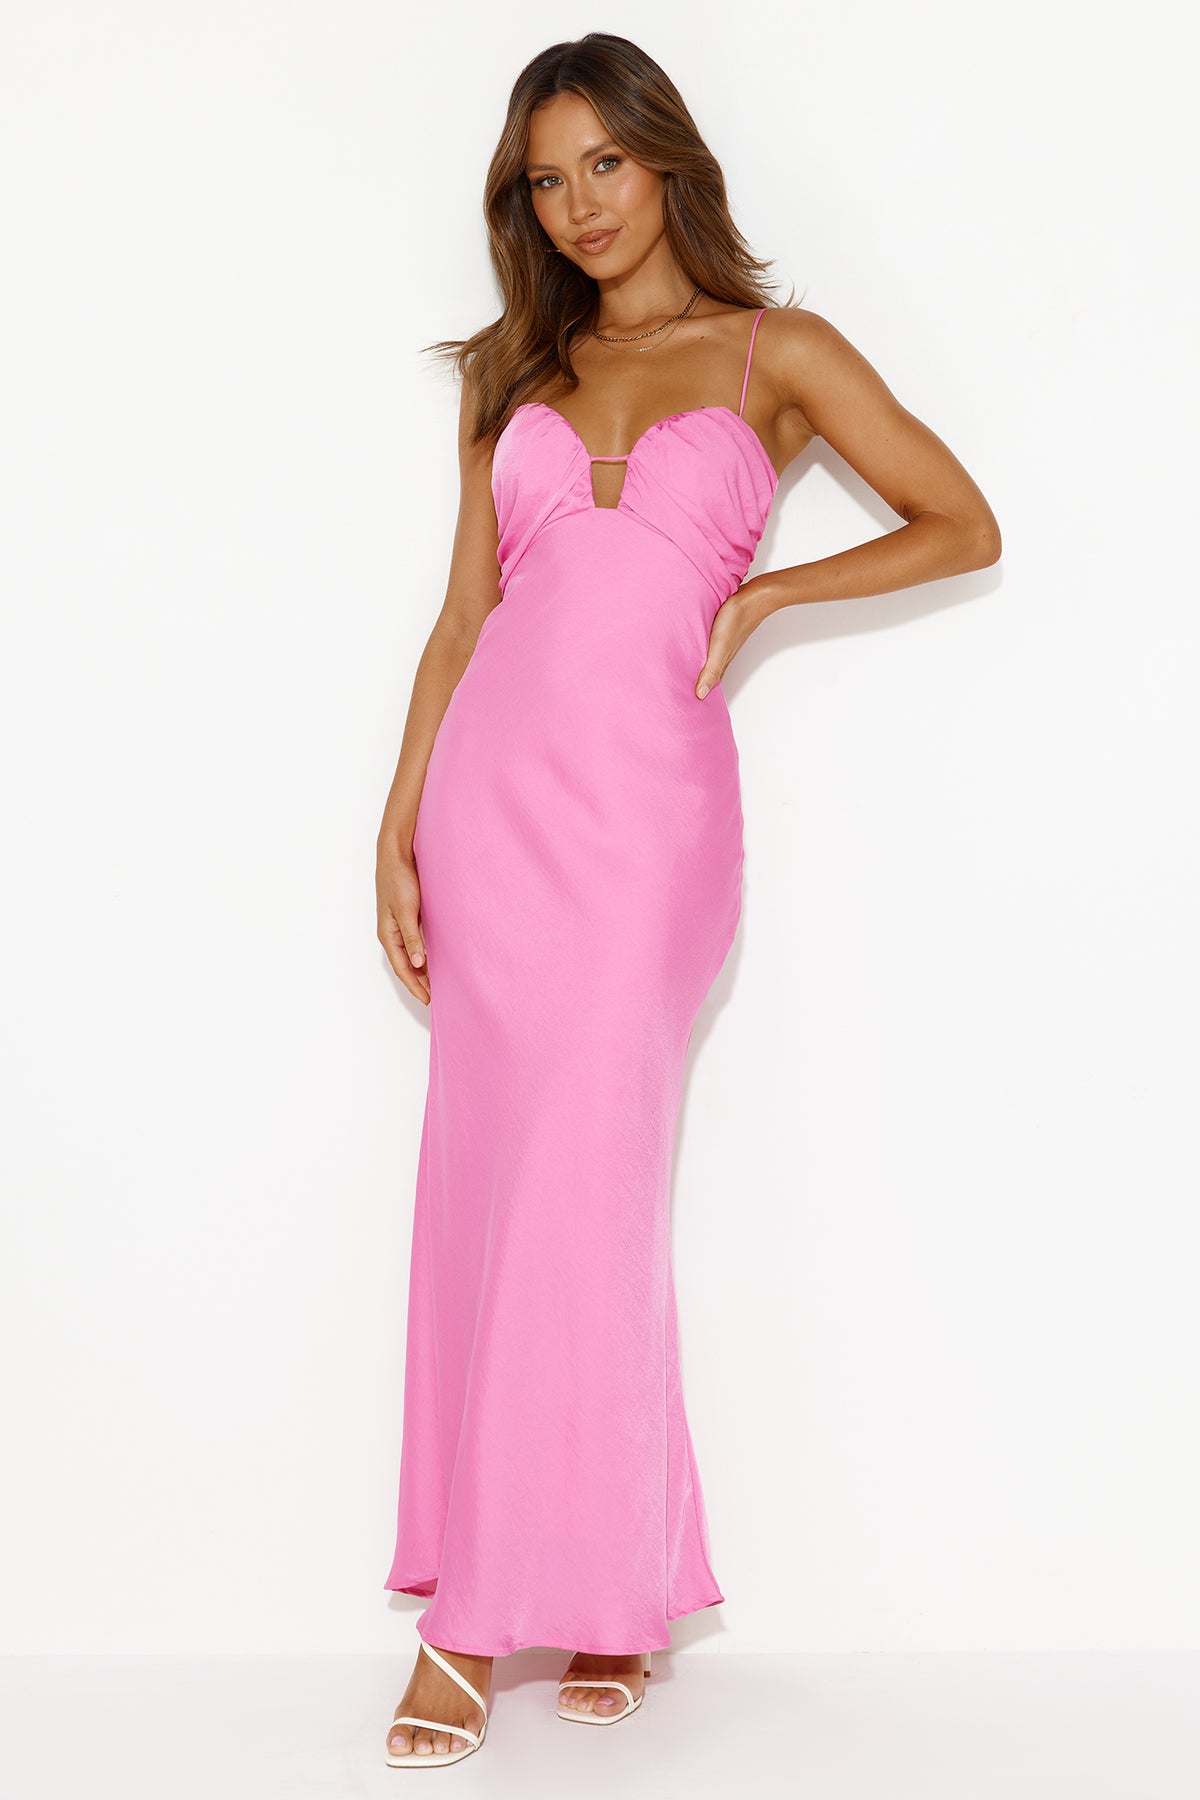 Shop Formal Dress - Room In The Castle Maxi Dress Pink featured image